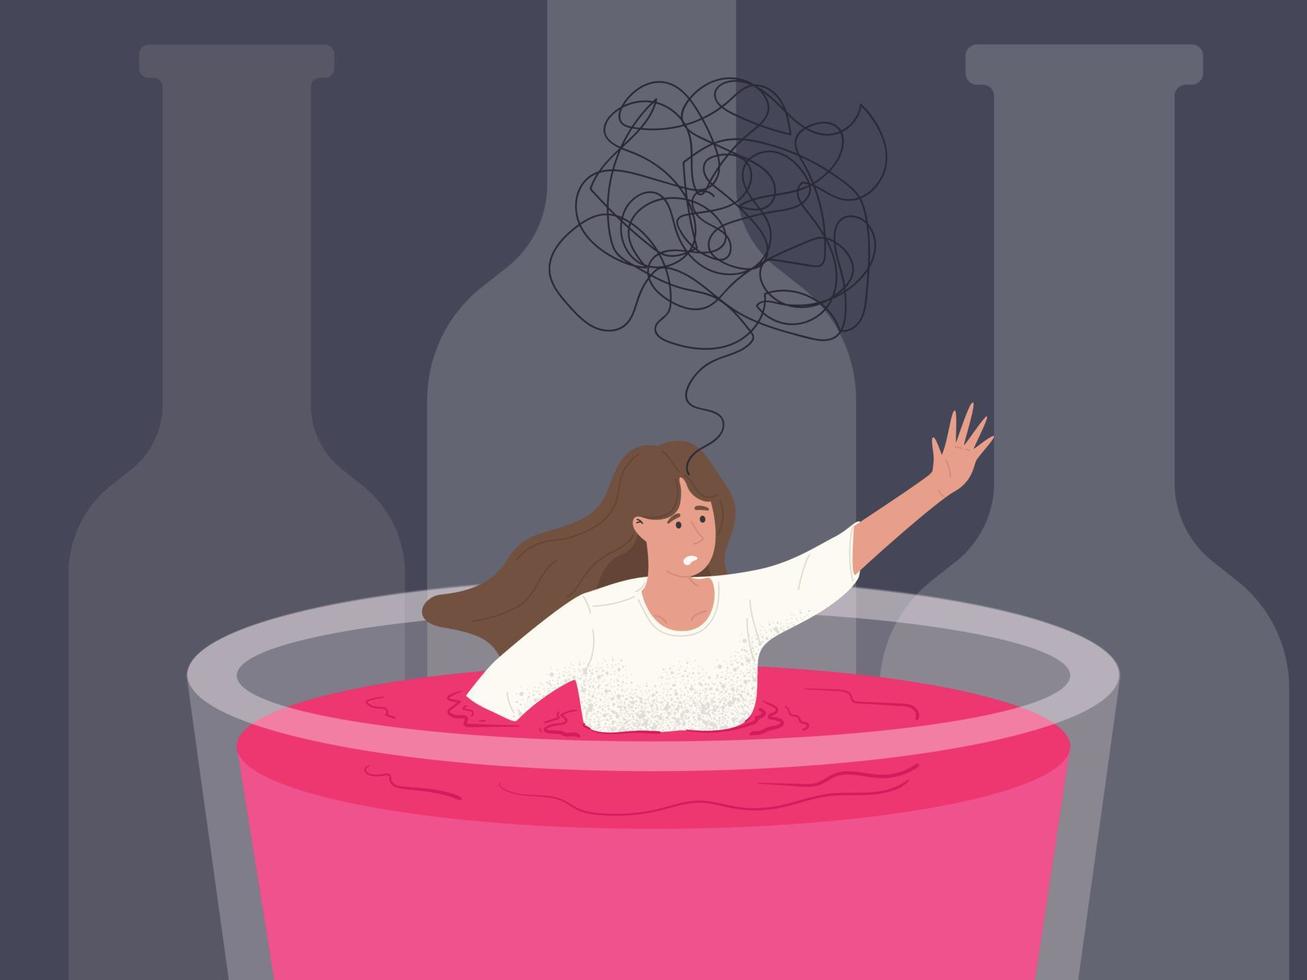 Afraid woman drowning in glass of alcohol. Alcoholism concept vector